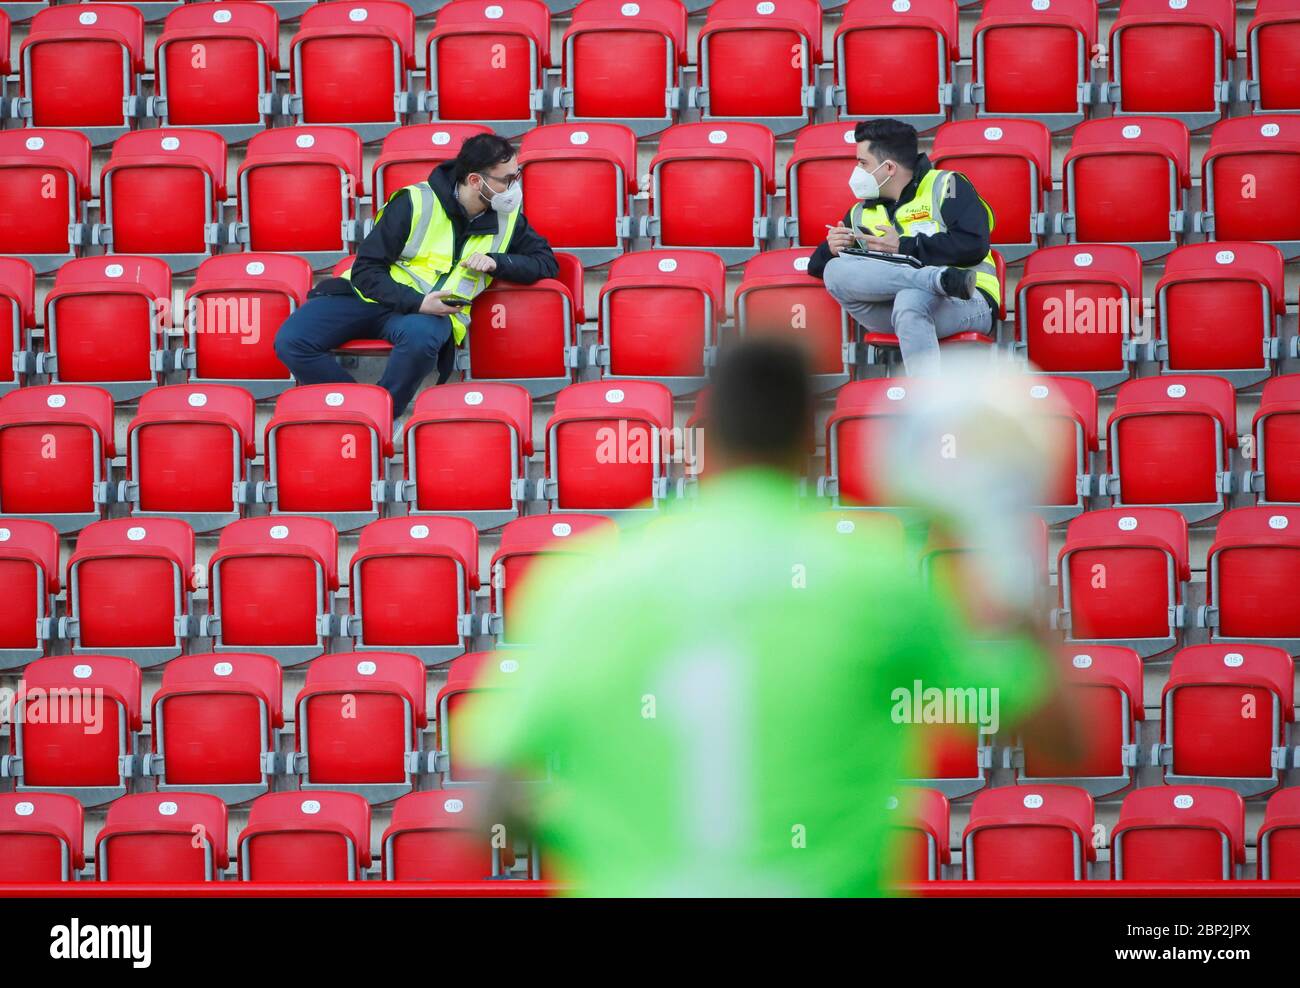 Steward in the stands during the German Bundesliga soccer match between Union Berlin and Bayern Munich in Berlin, Germany. Stock Photo